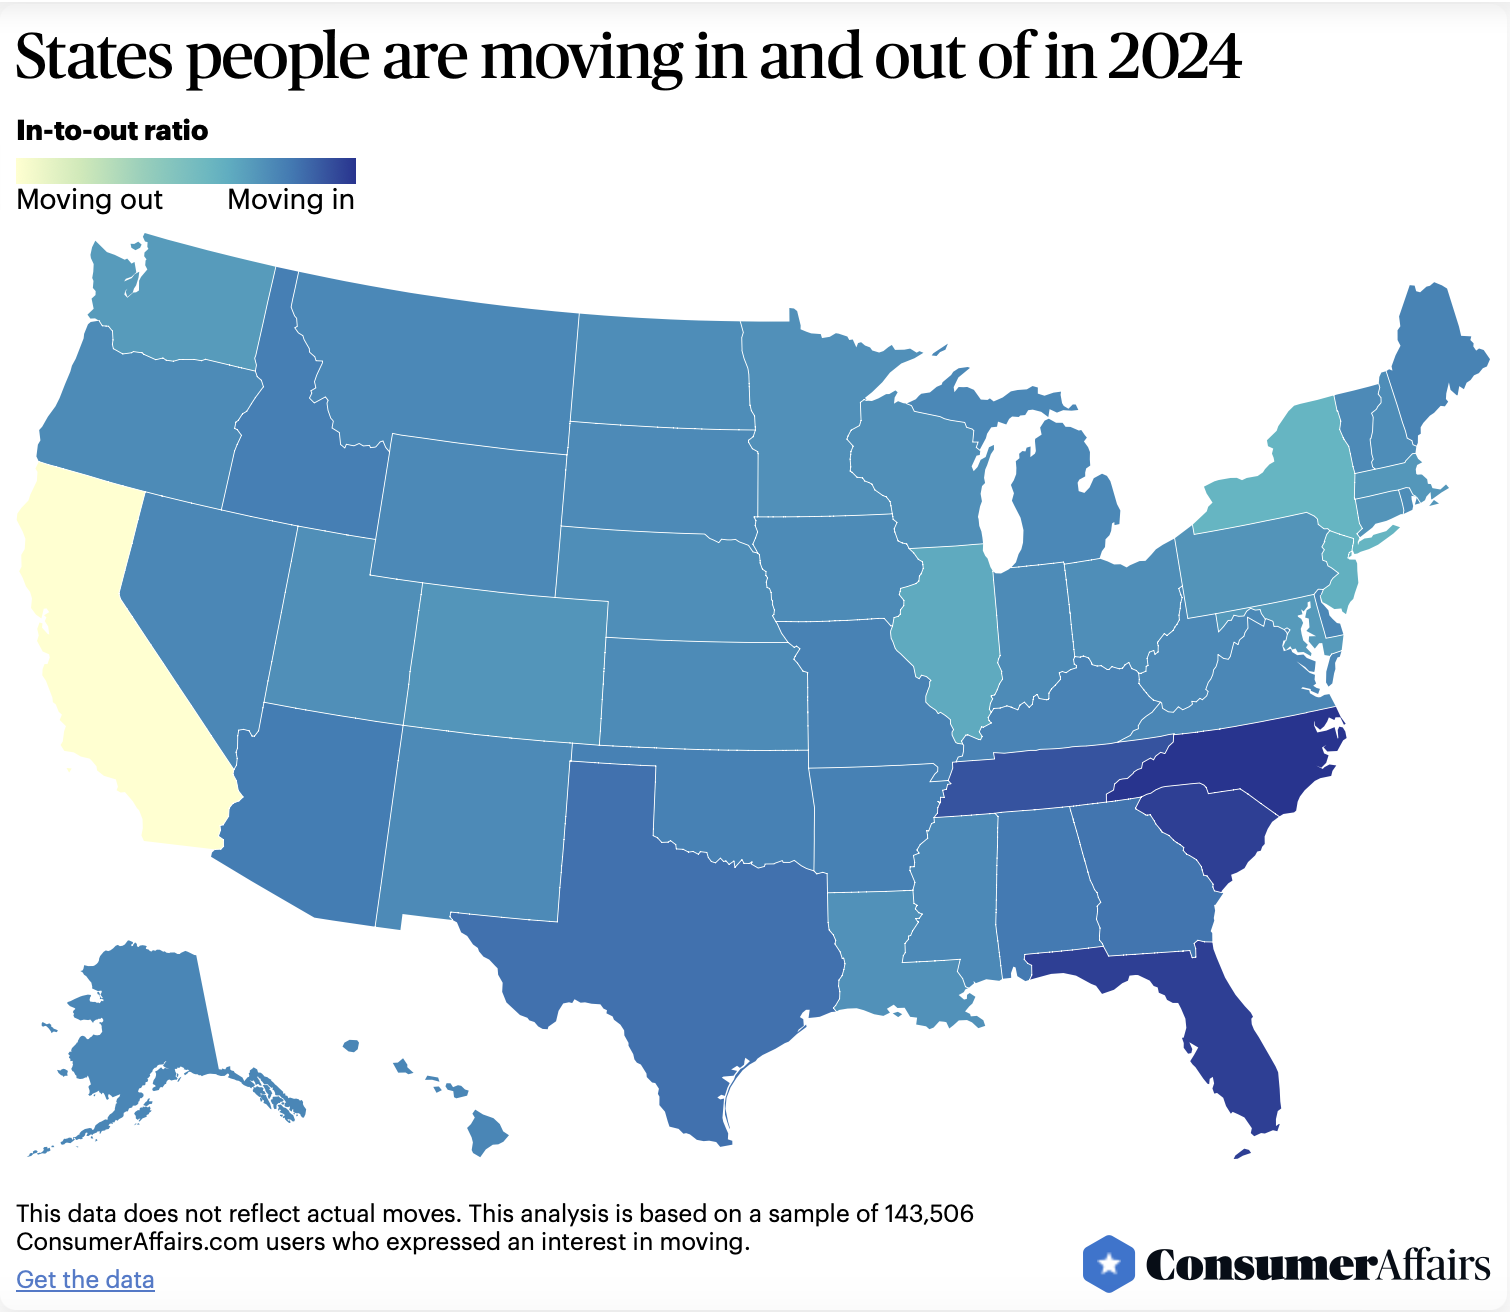 Consumer Affairs Migration Report: California Leads States People are Fleeing